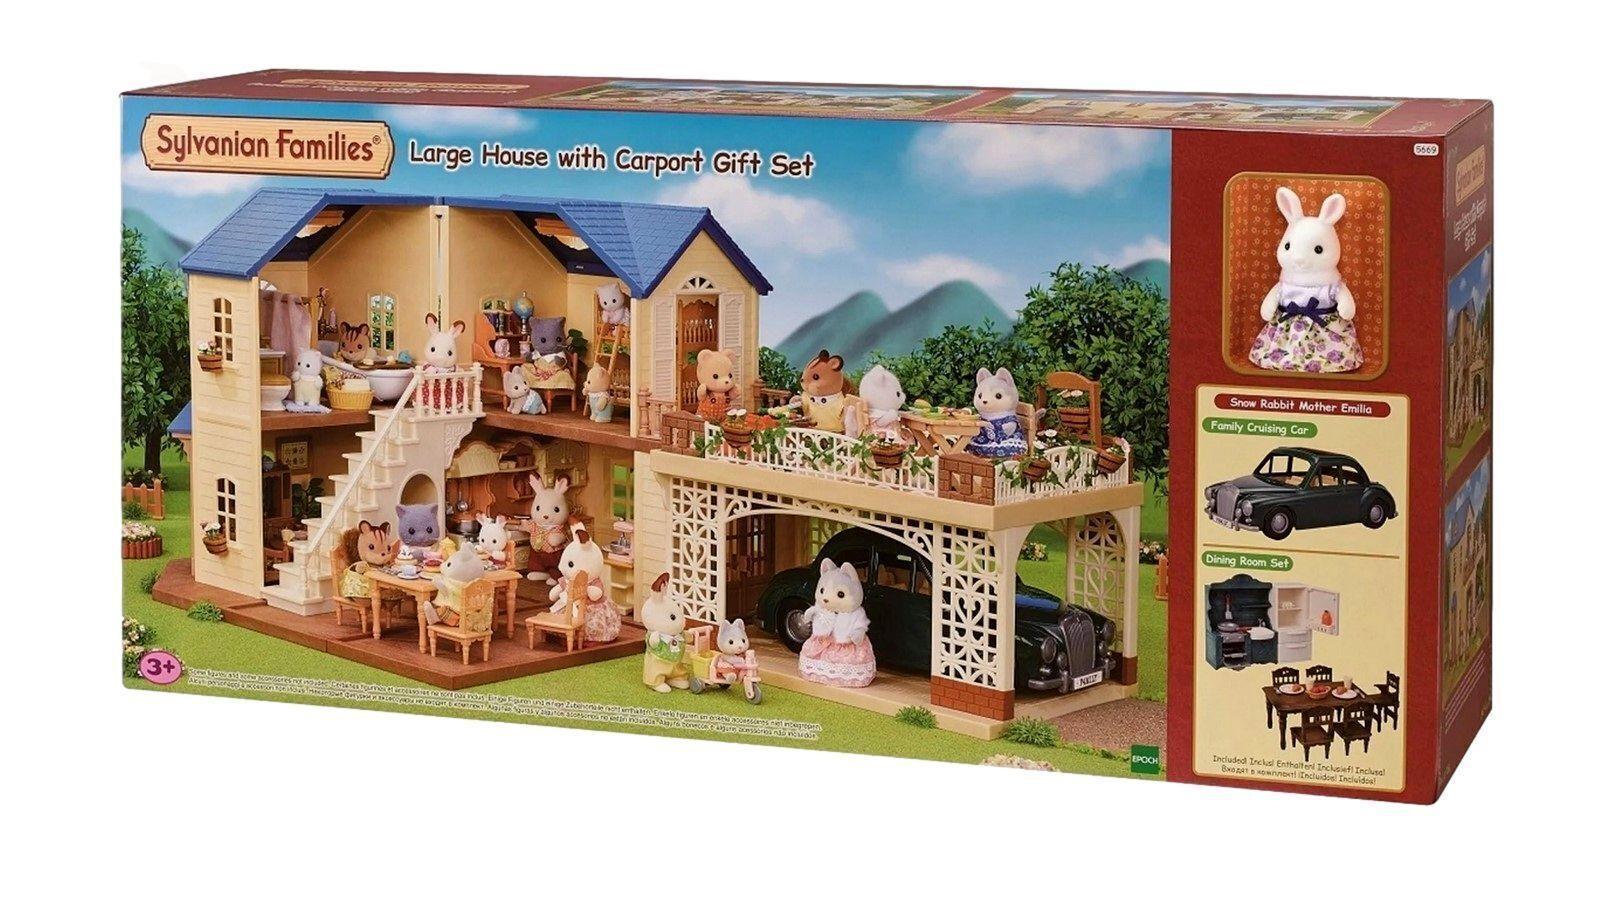 Sylvanian Families Large House with Carport Gift Set 5669